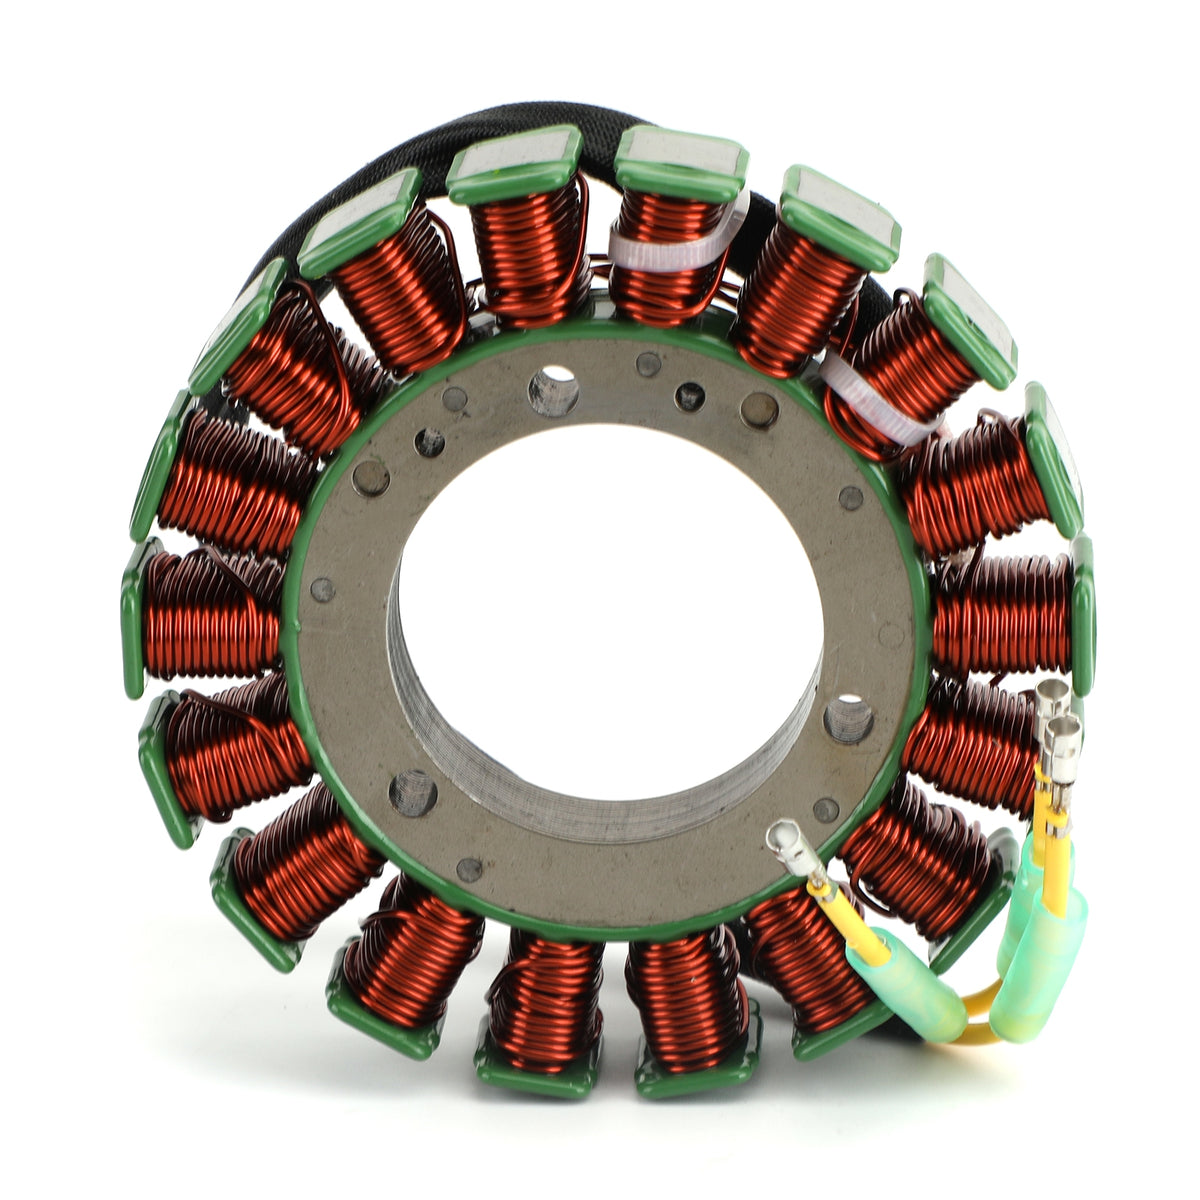 Magneto Generator Engine Stator Coil Fit For Tohatsu MD40B MD50B MD70B MD90B #3Y9-06123-0